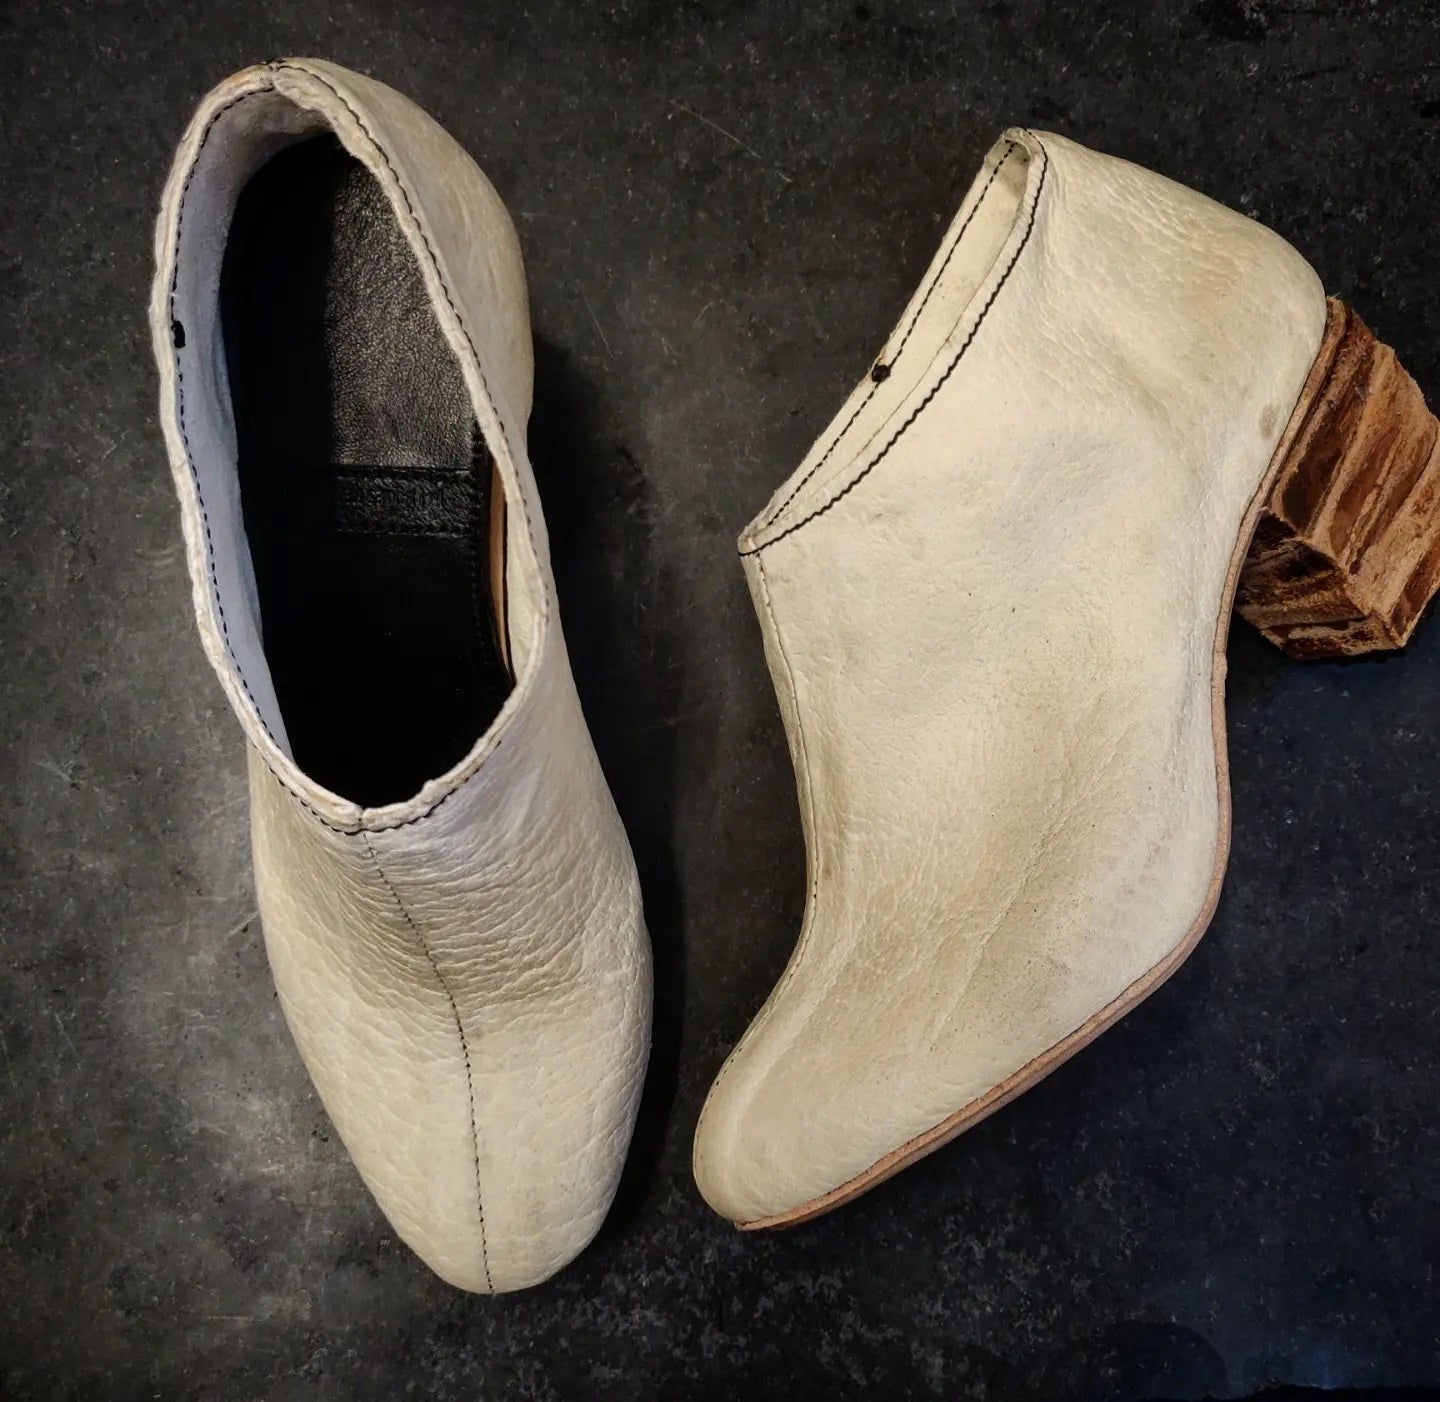 Pair of ankle boots in off white leather with a 7cm leather block heel. 